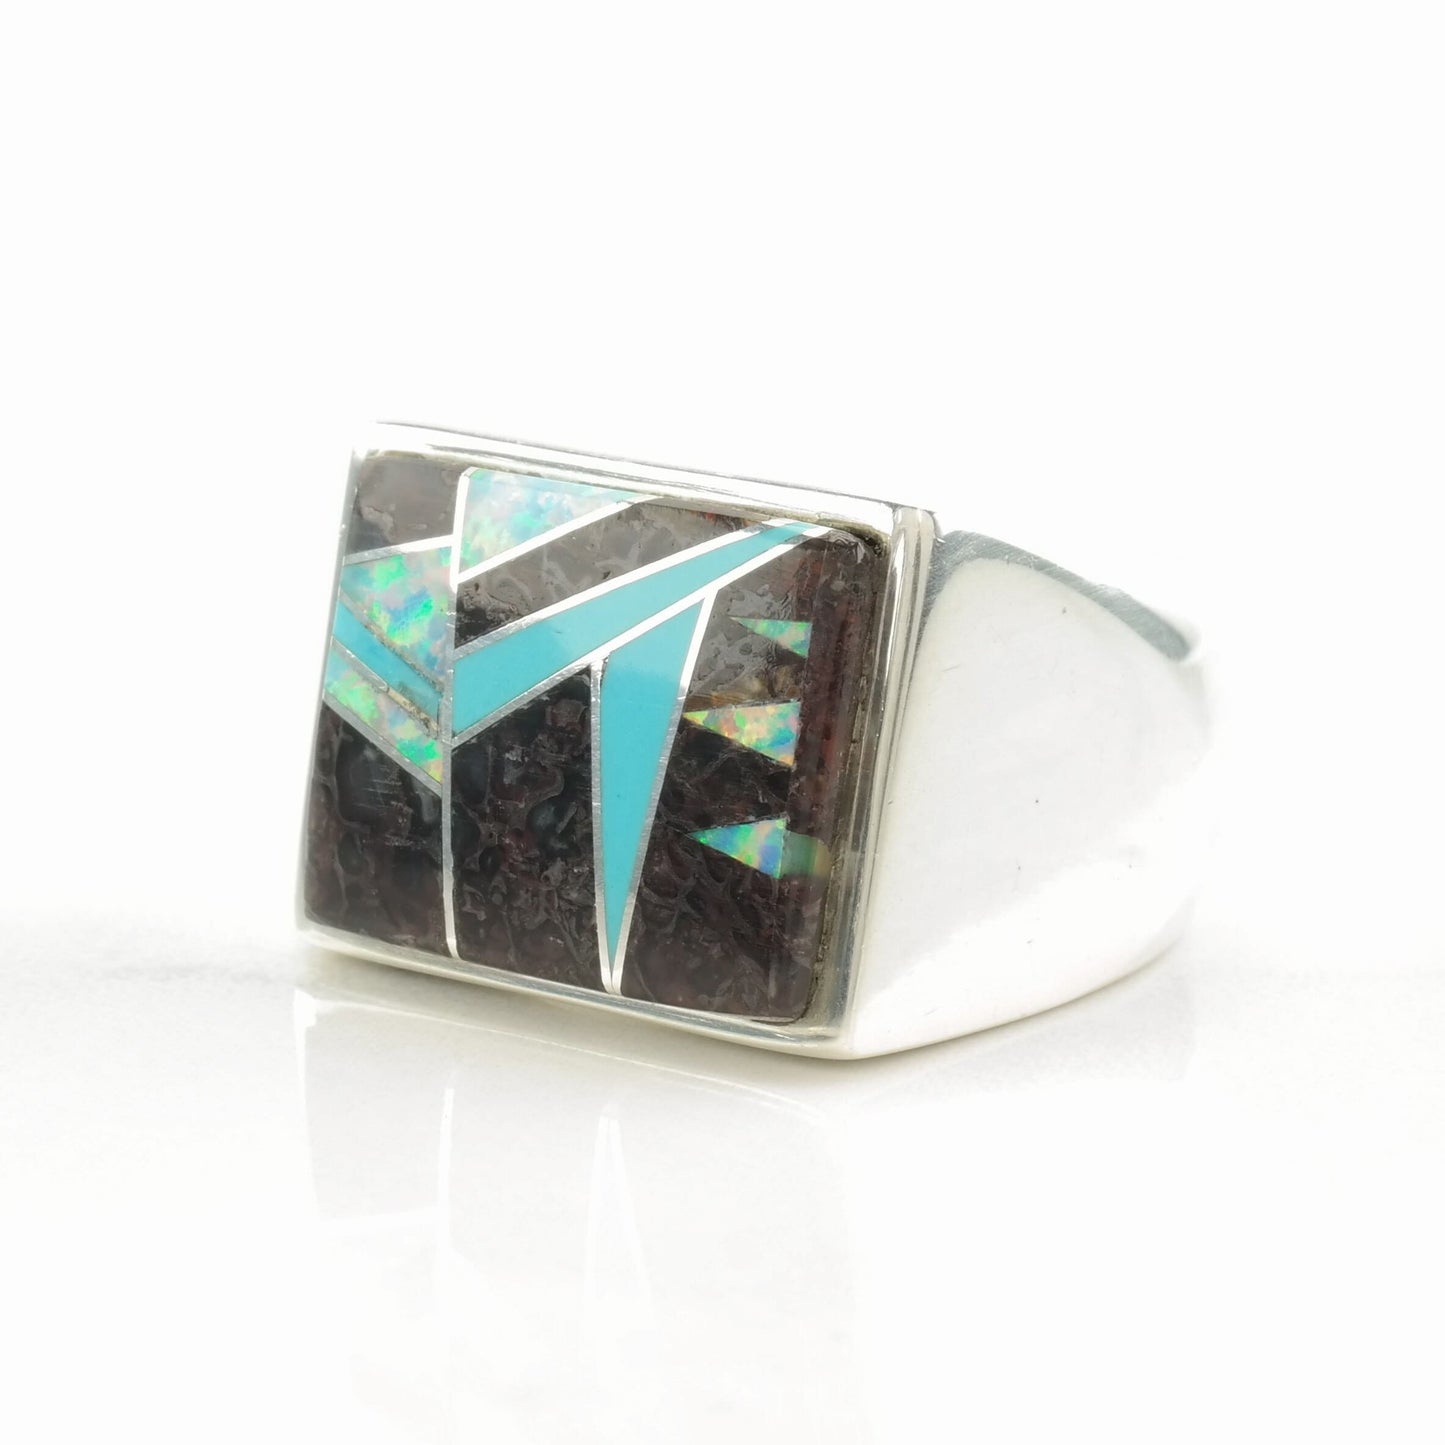 Vintage Southwest Silver Ring Turquoise Lab Opal Stone Inlay Sterling Size 11 1/2